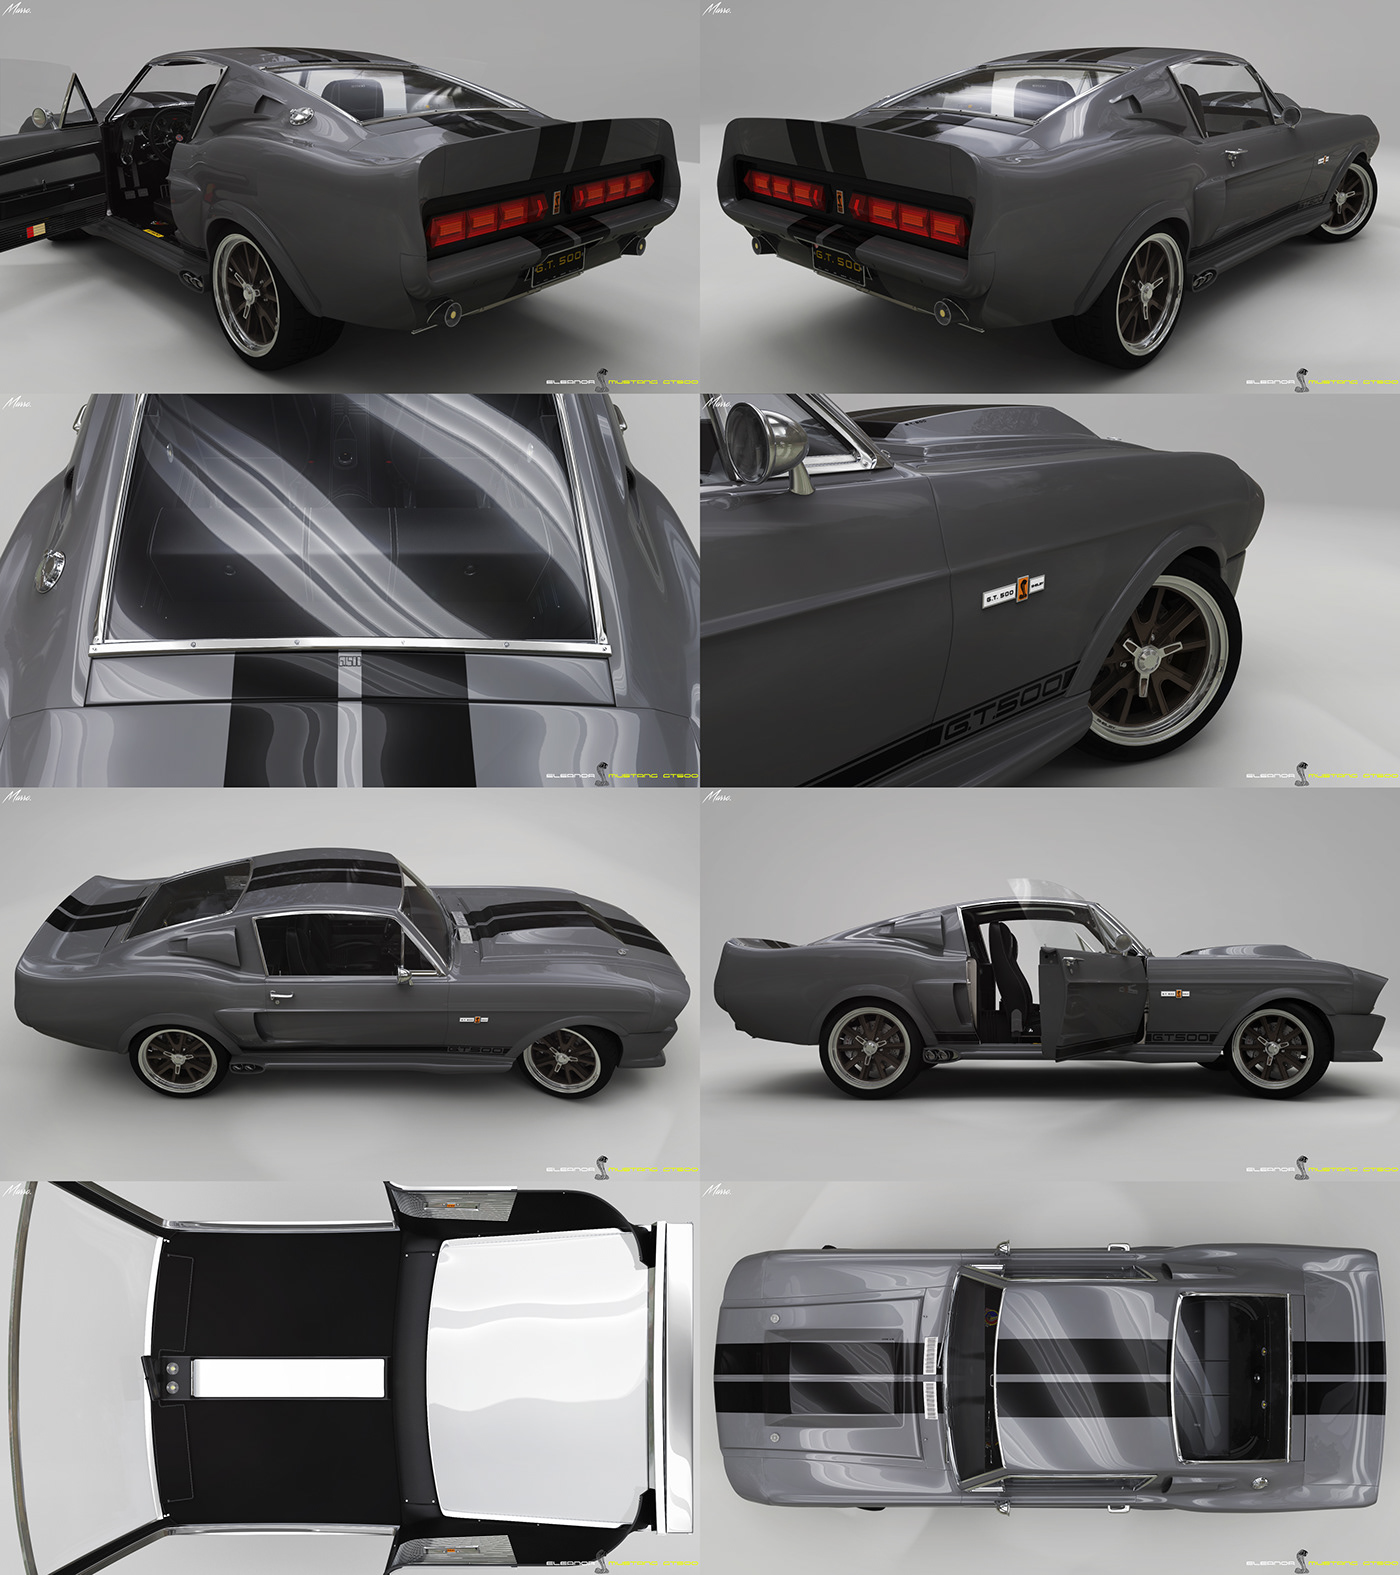 Ford Eleanor Mustang vray CGI animation  car Vehicle GT500 vfx